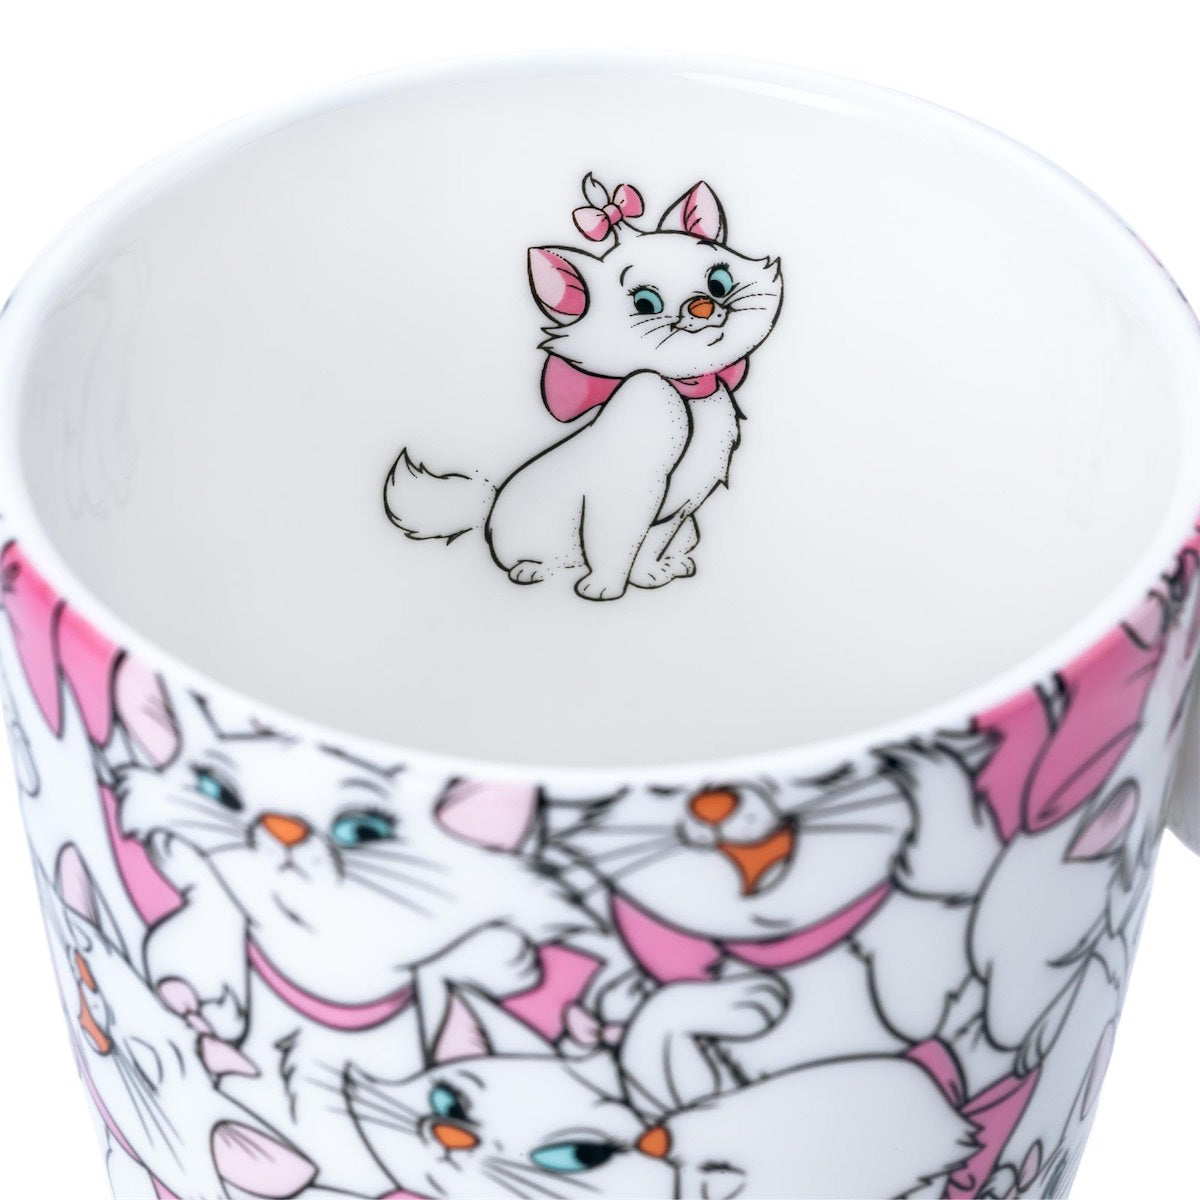 Aristocats Marie Bone China Espresso Cup and Saucer